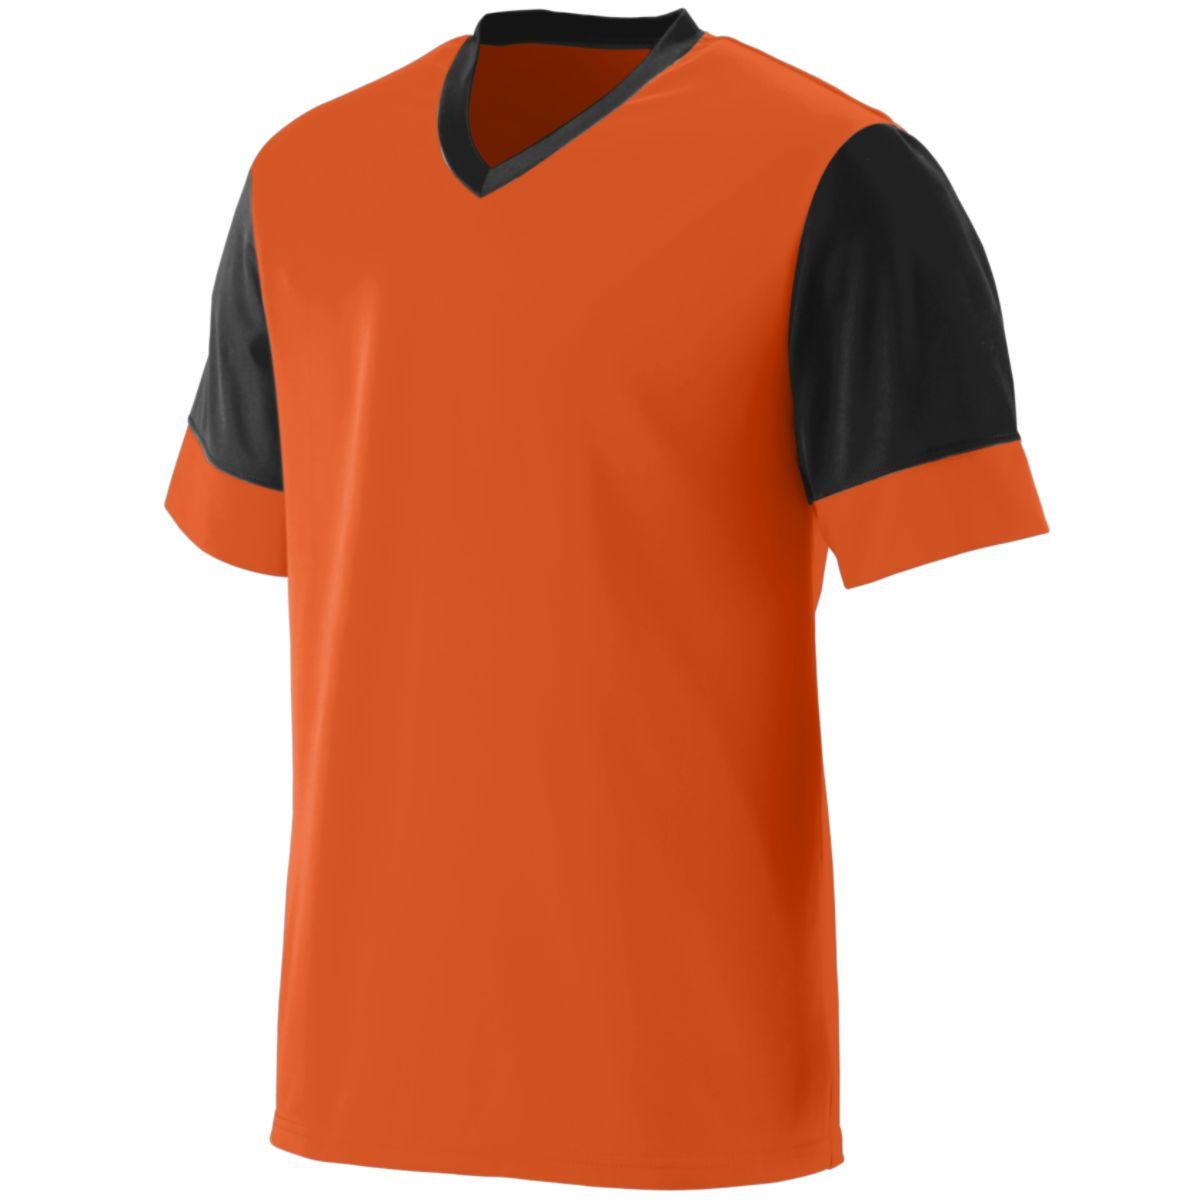 Augusta Sportswear Youth Lightning Jersey in Orange/Black  -Part of the Youth, Youth-Jersey, Augusta-Products, Soccer, Shirts, All-Sports-1 product lines at KanaleyCreations.com